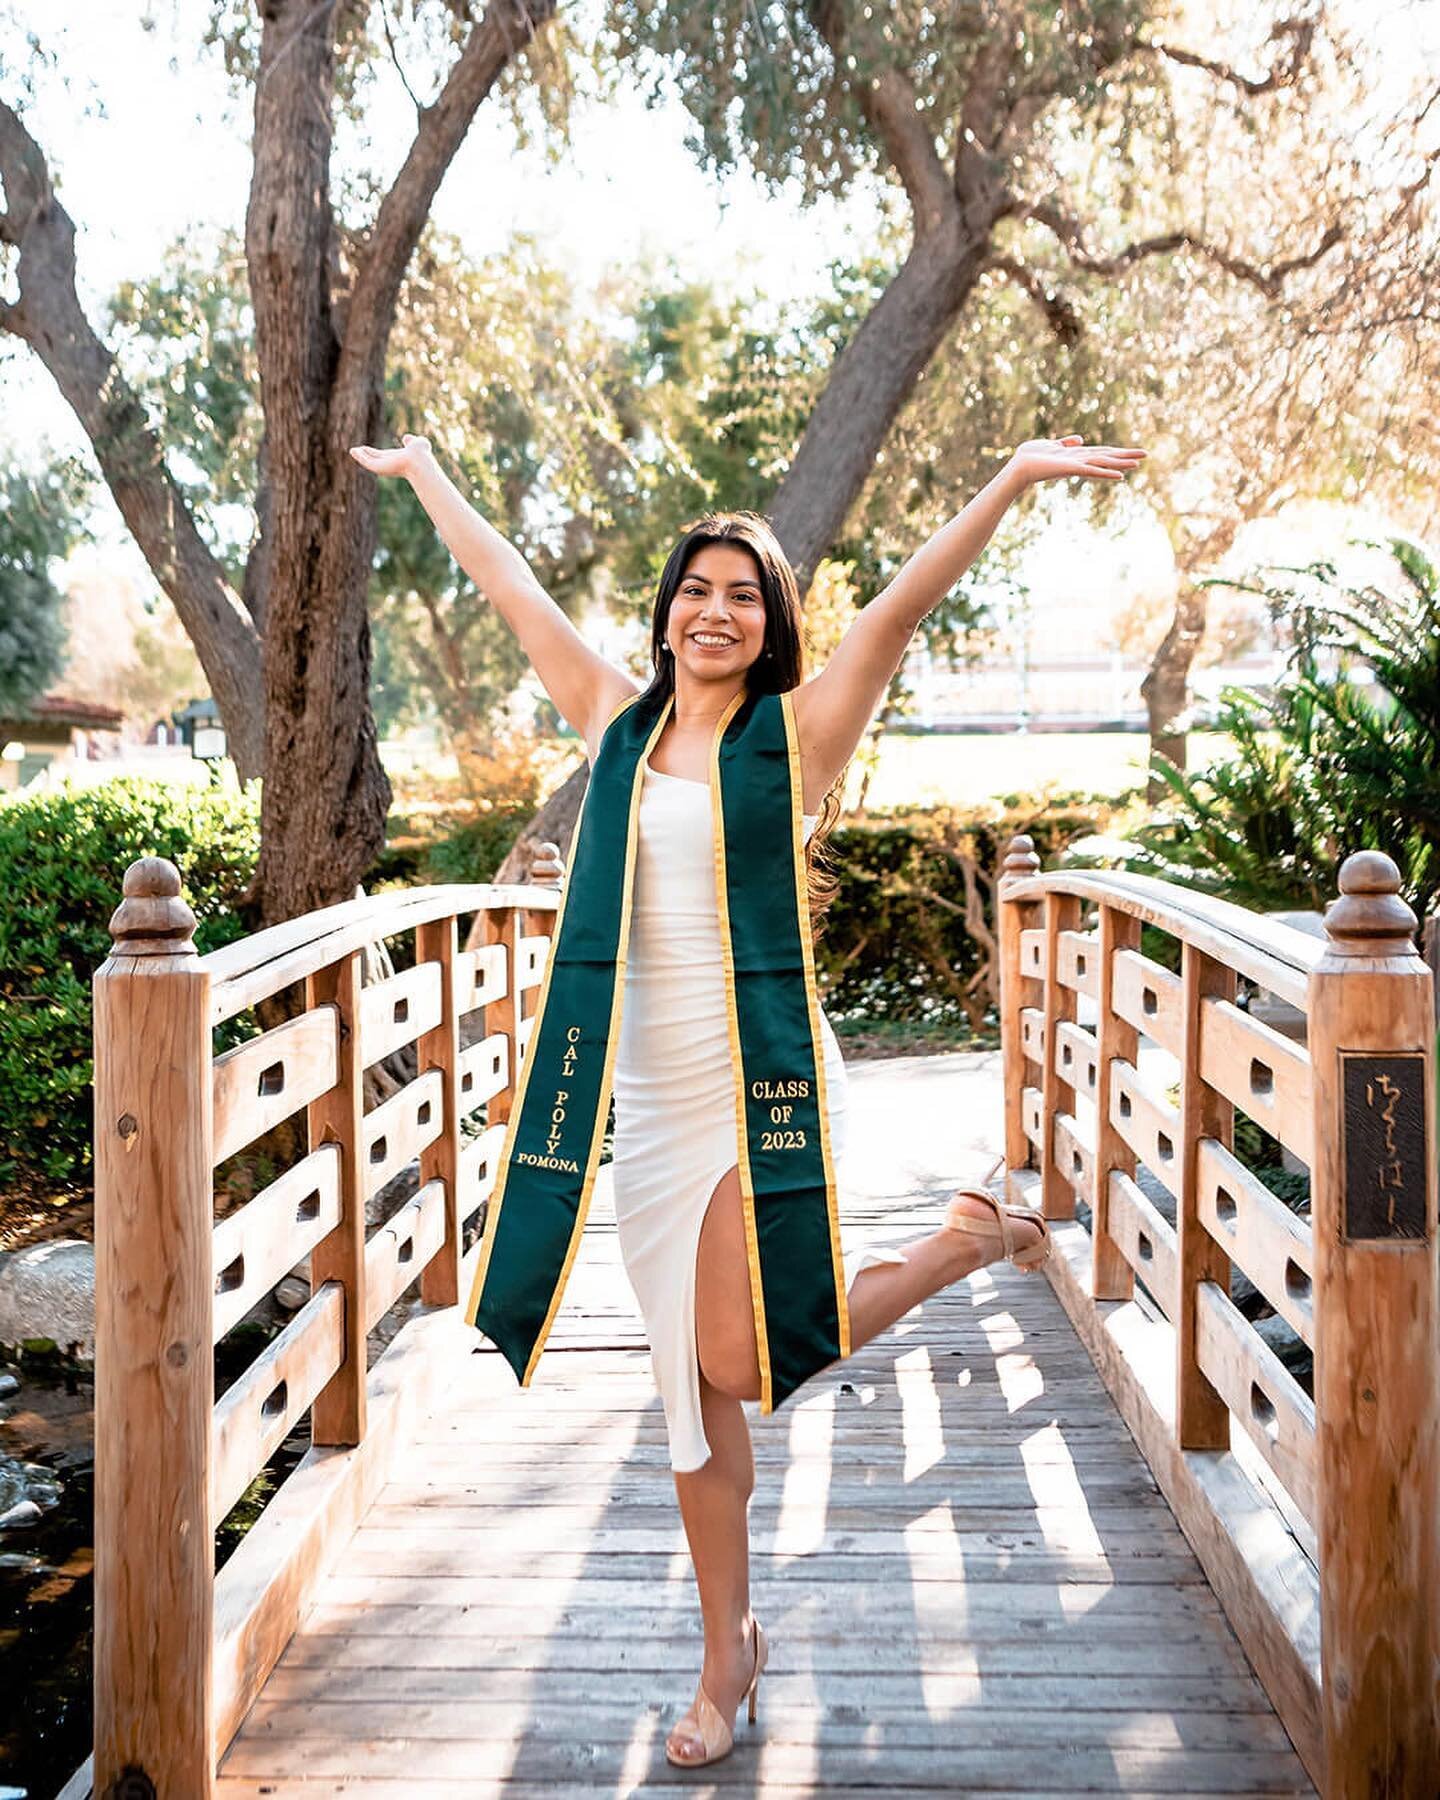 Hello &ndash; just a small update on the backlog! UC Berkeley is finally done, and I can move onto other schools now. 

And for my UC Davis grads, I&rsquo;ll put out a statement later today on my IG stories. I know some of you are on edge and anxious